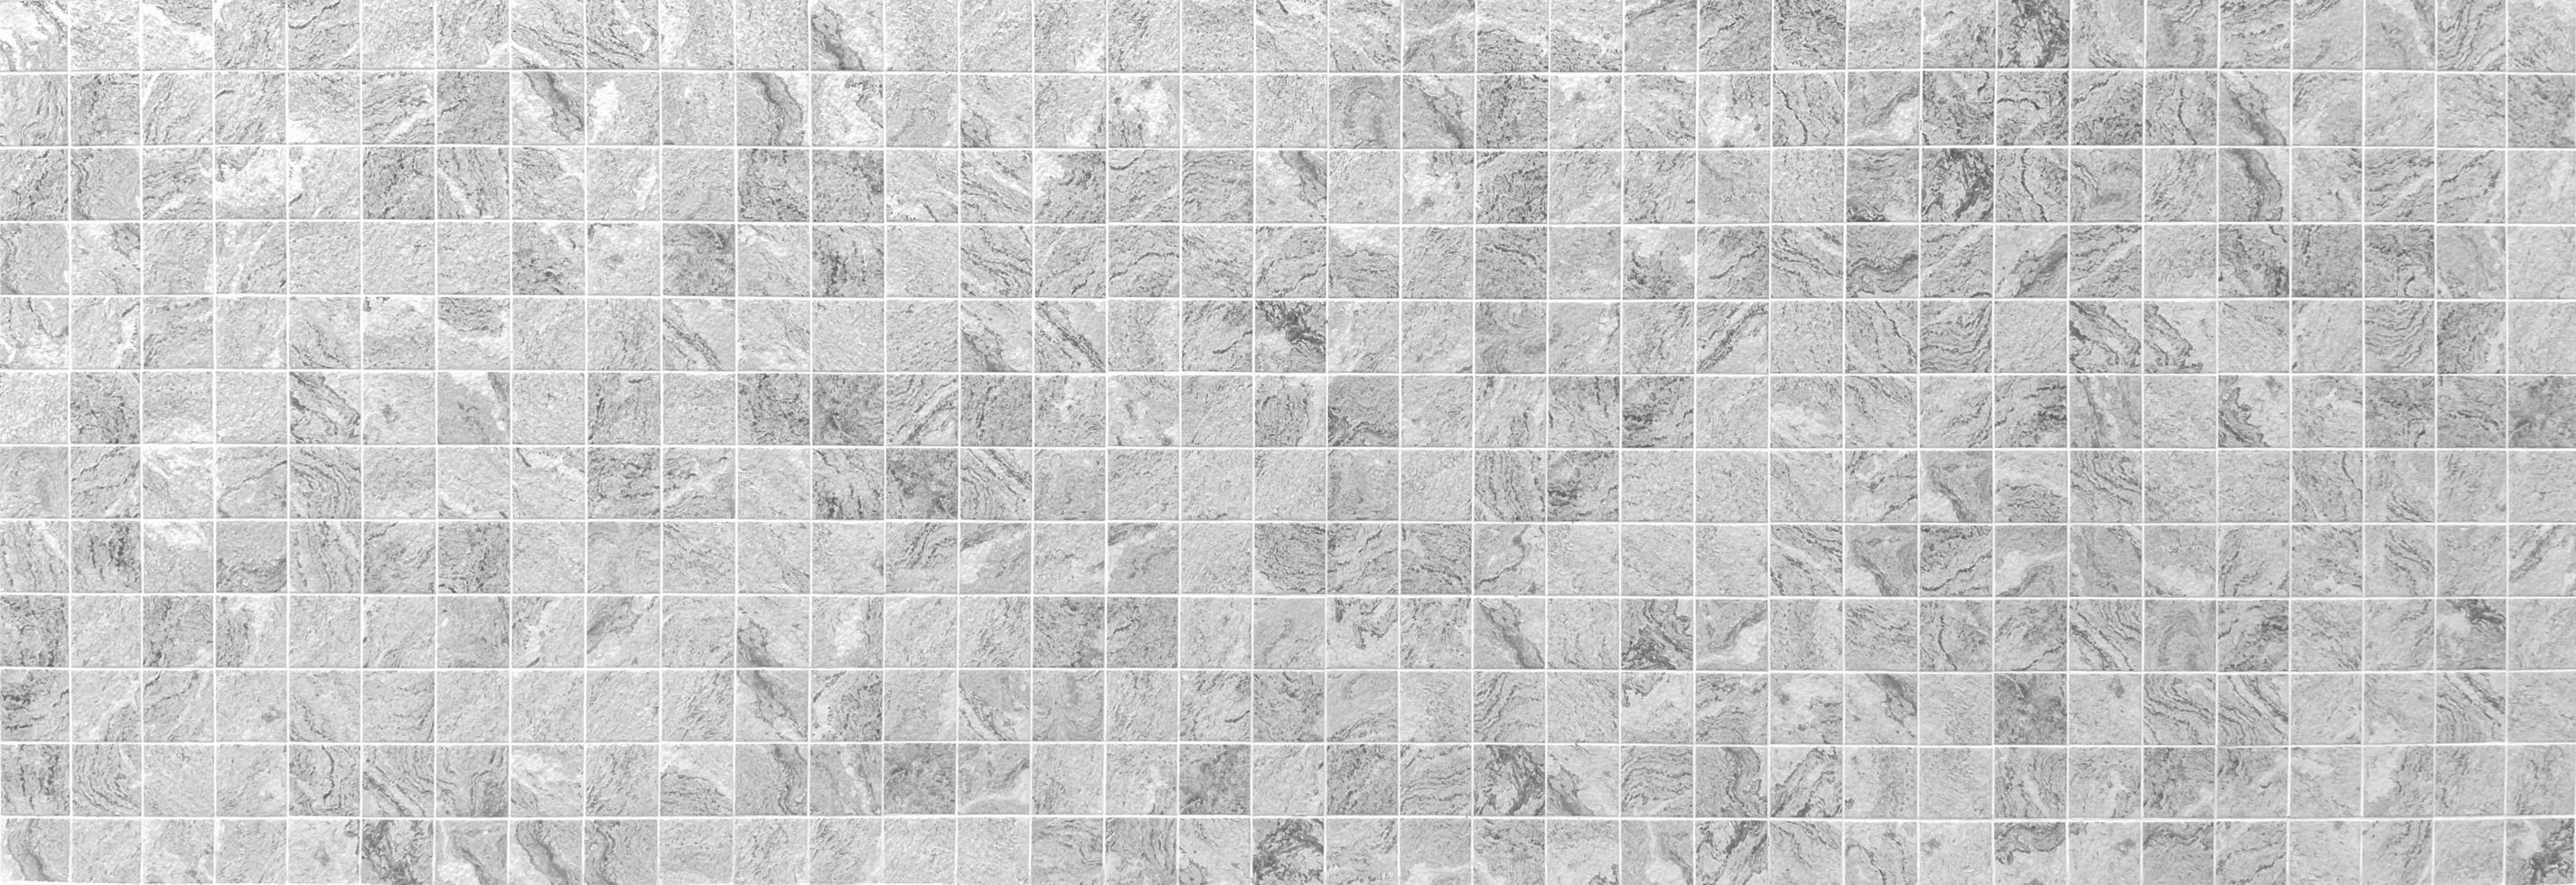 Background of floor tiles in black and white tones. photo